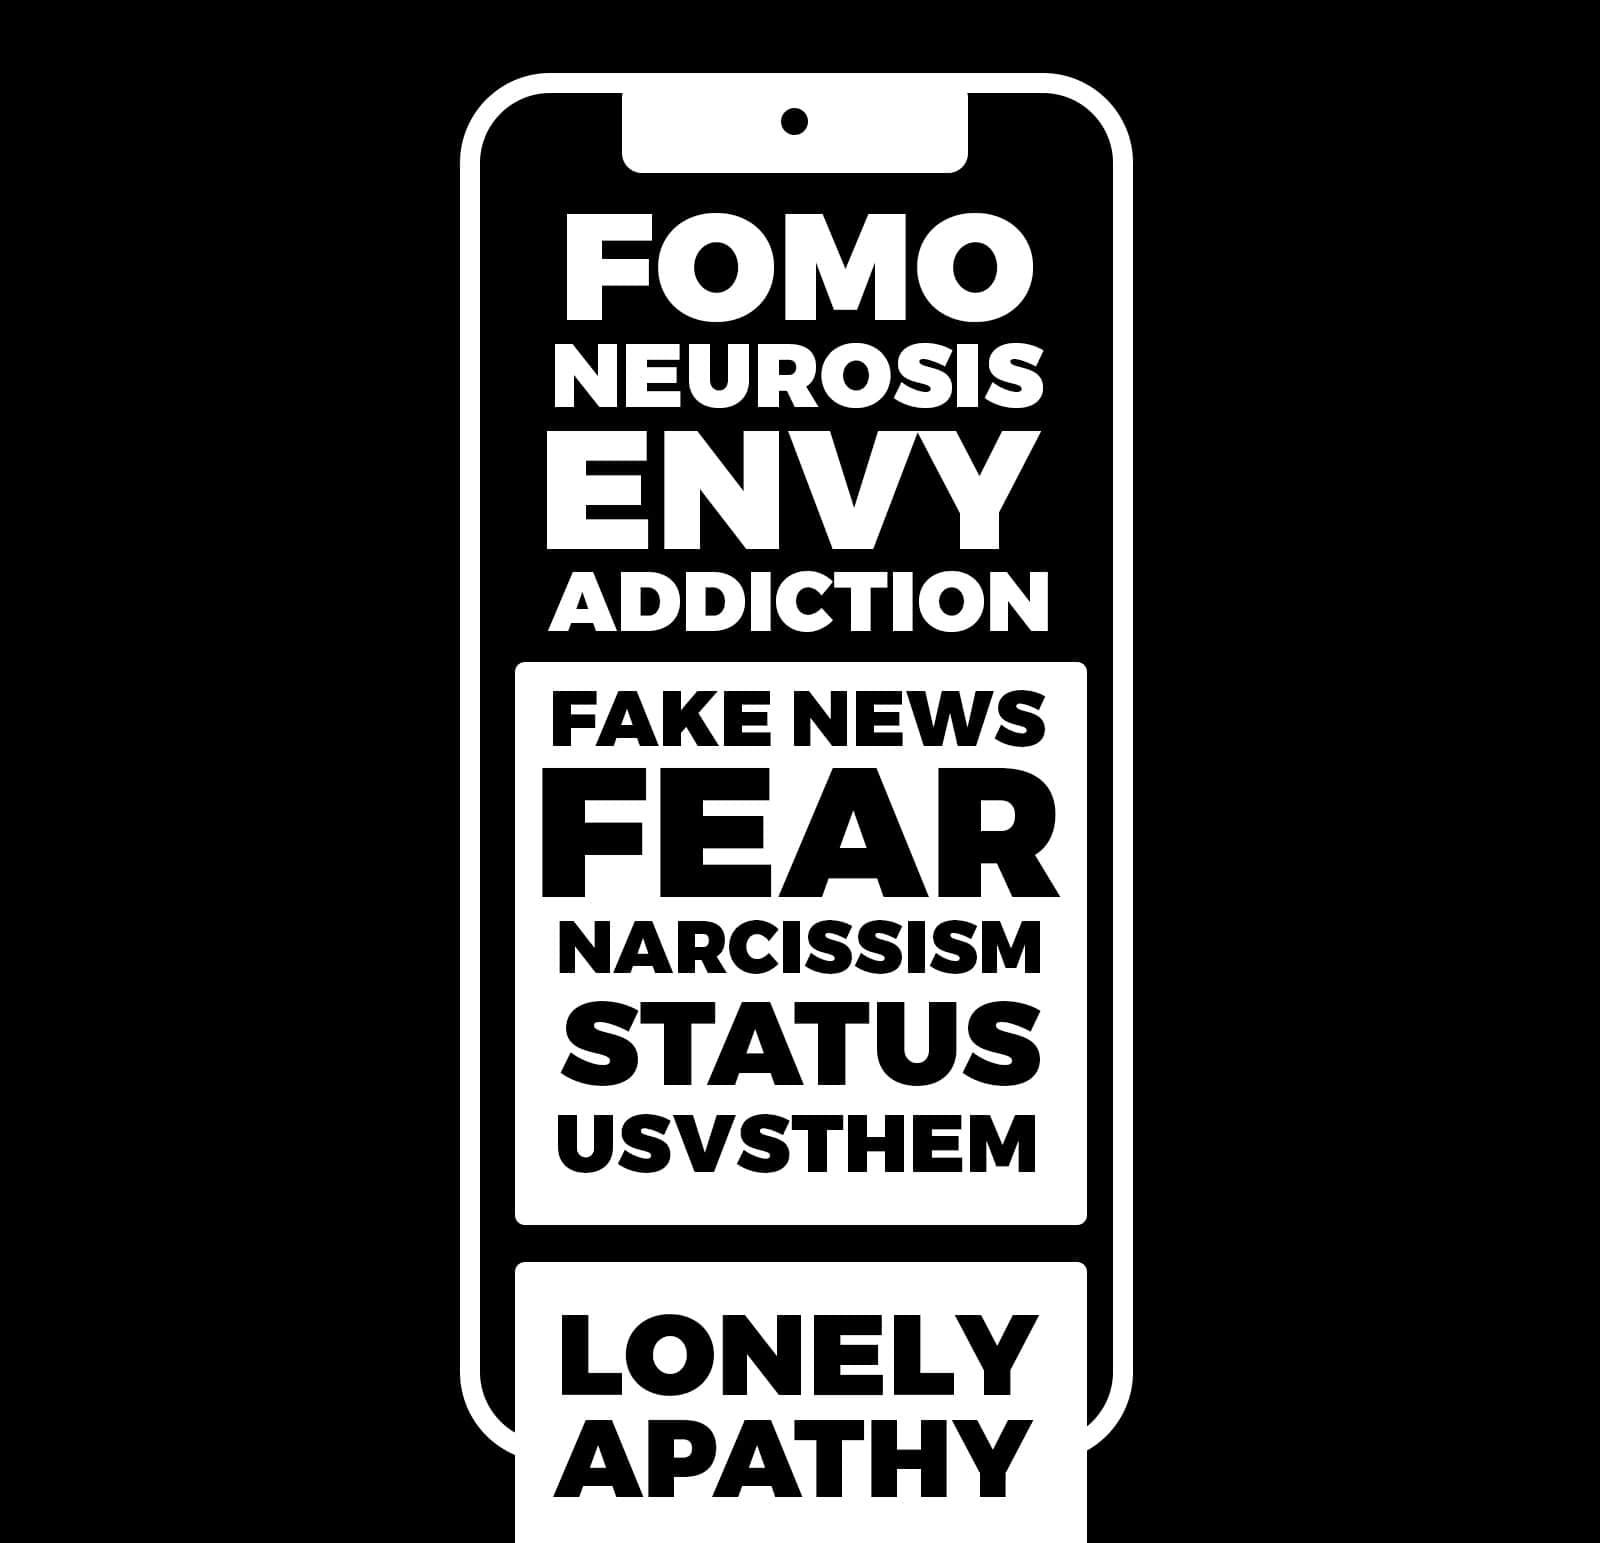 Graphic of smartphone and words that promote toxicity.